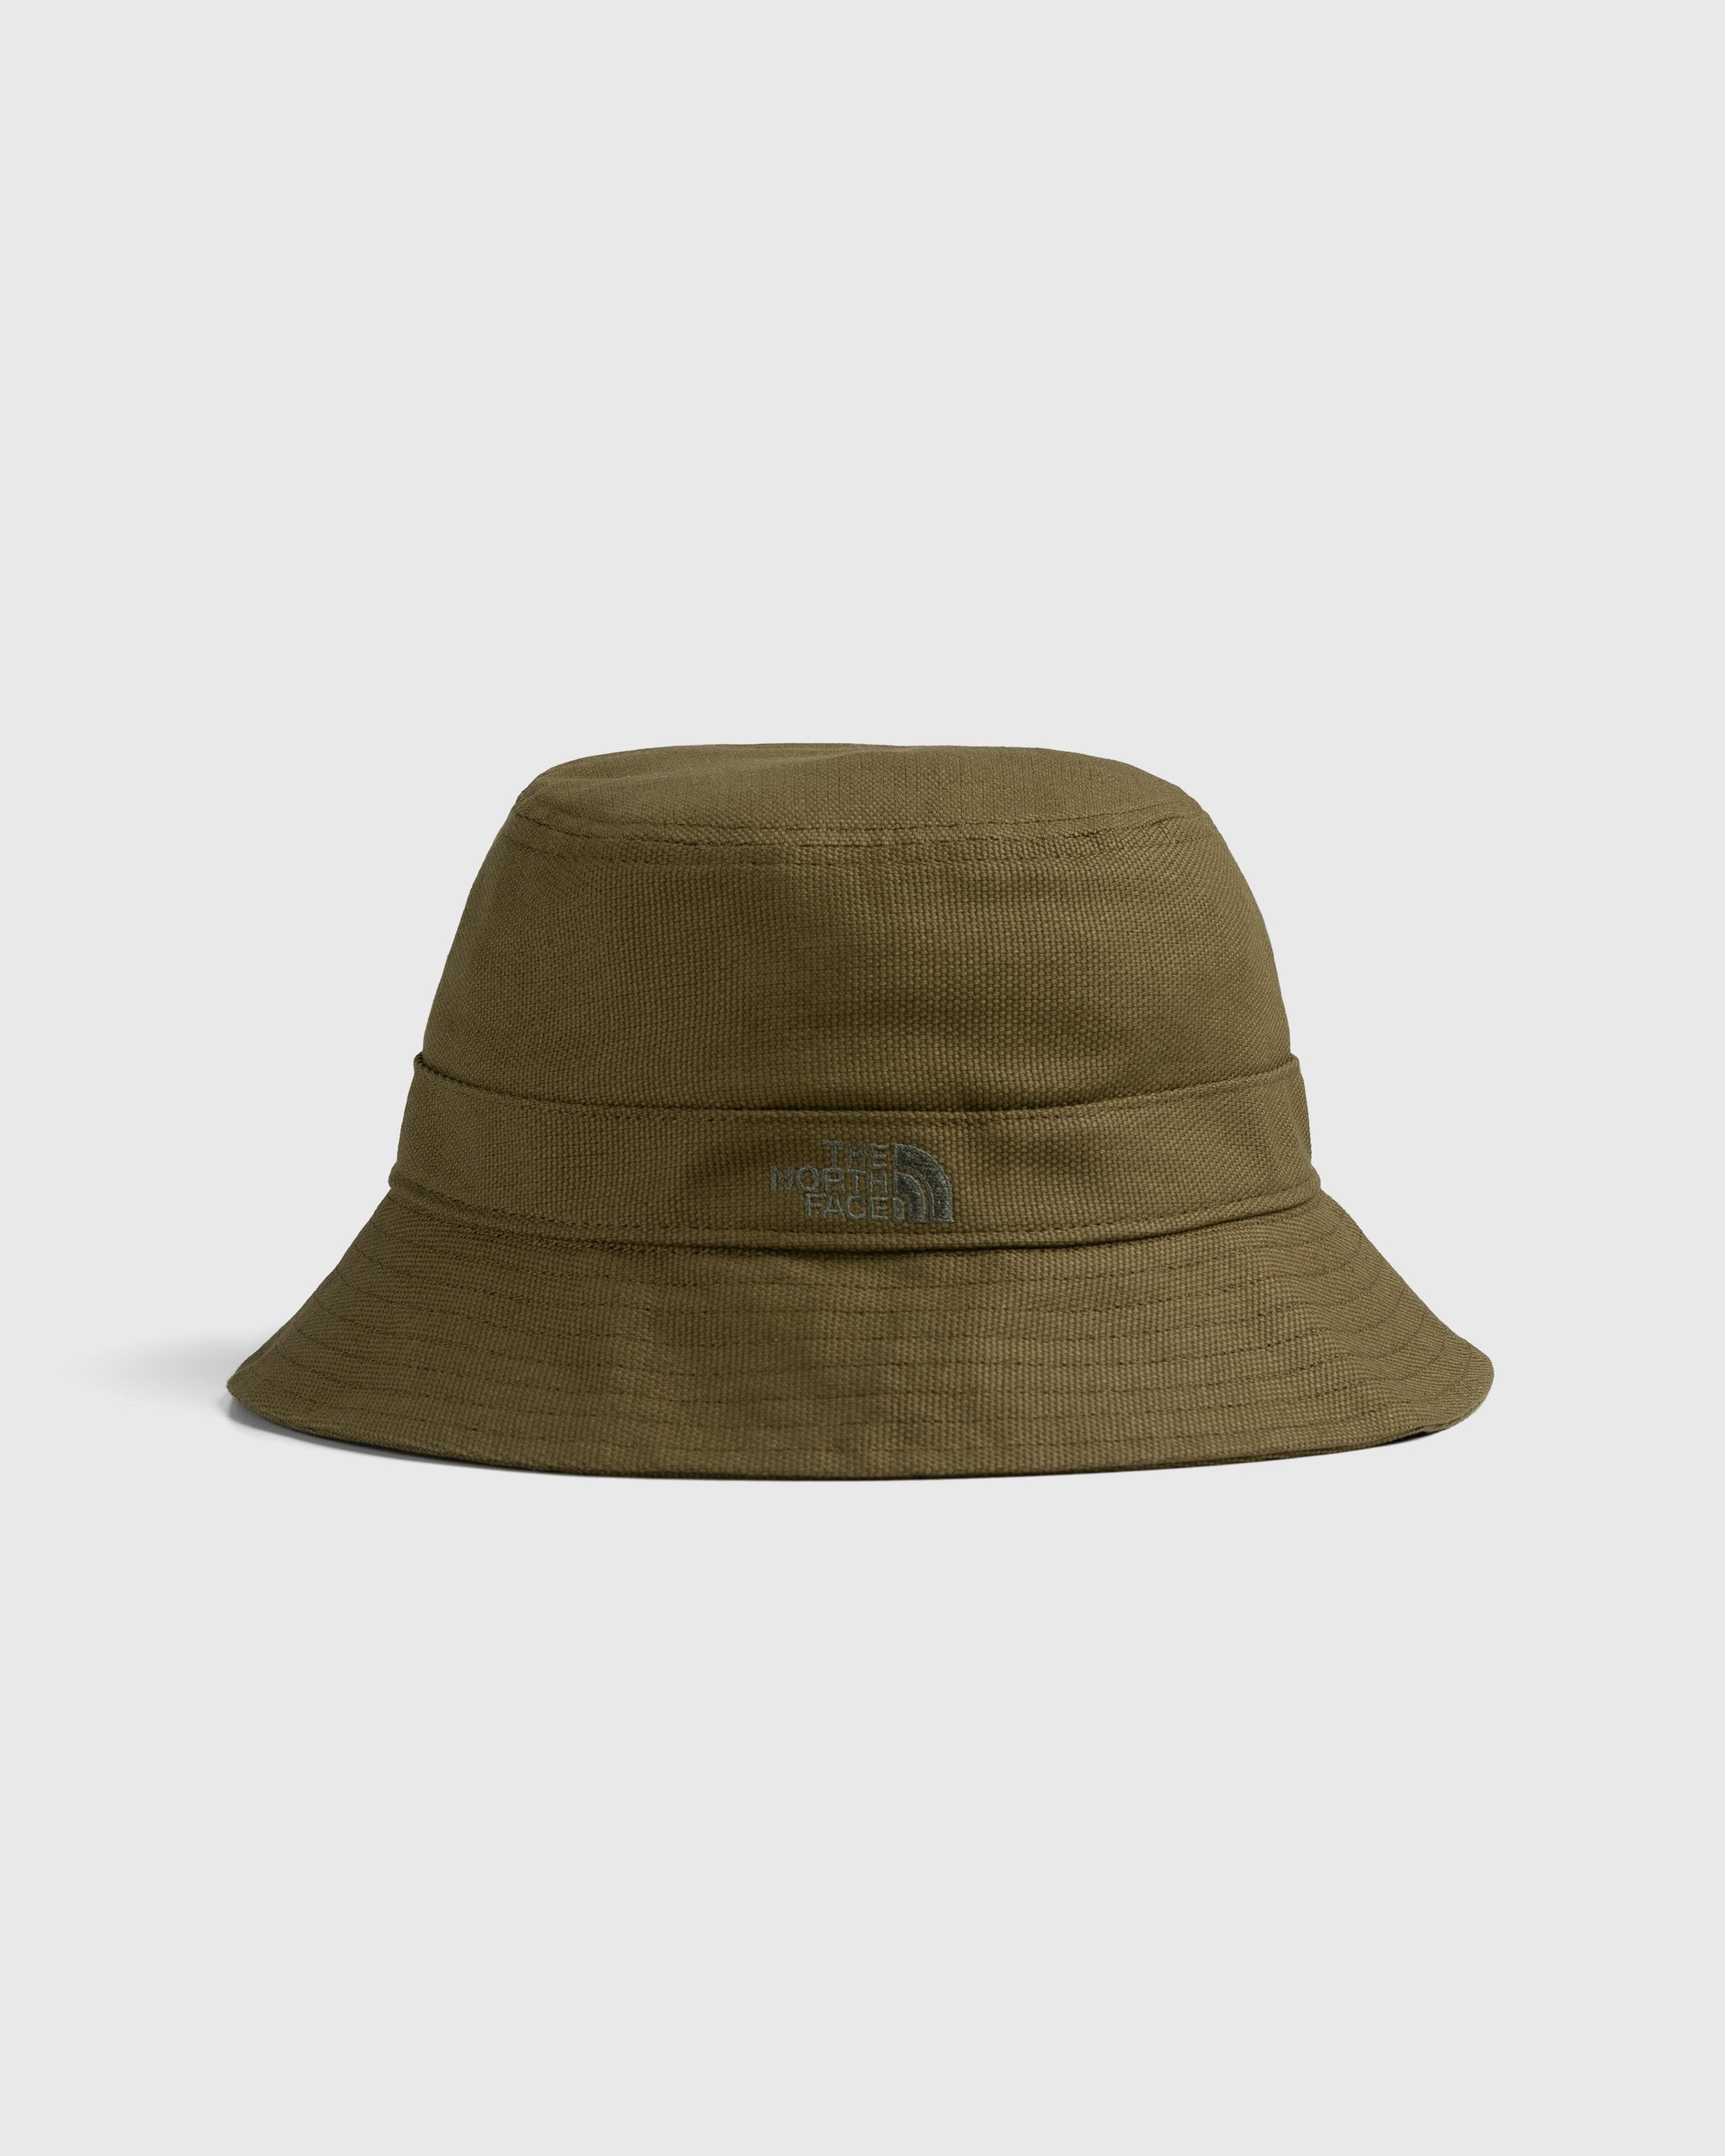 The North Face – Mountain Bucket Hat Olive | Highsnobiety Shop